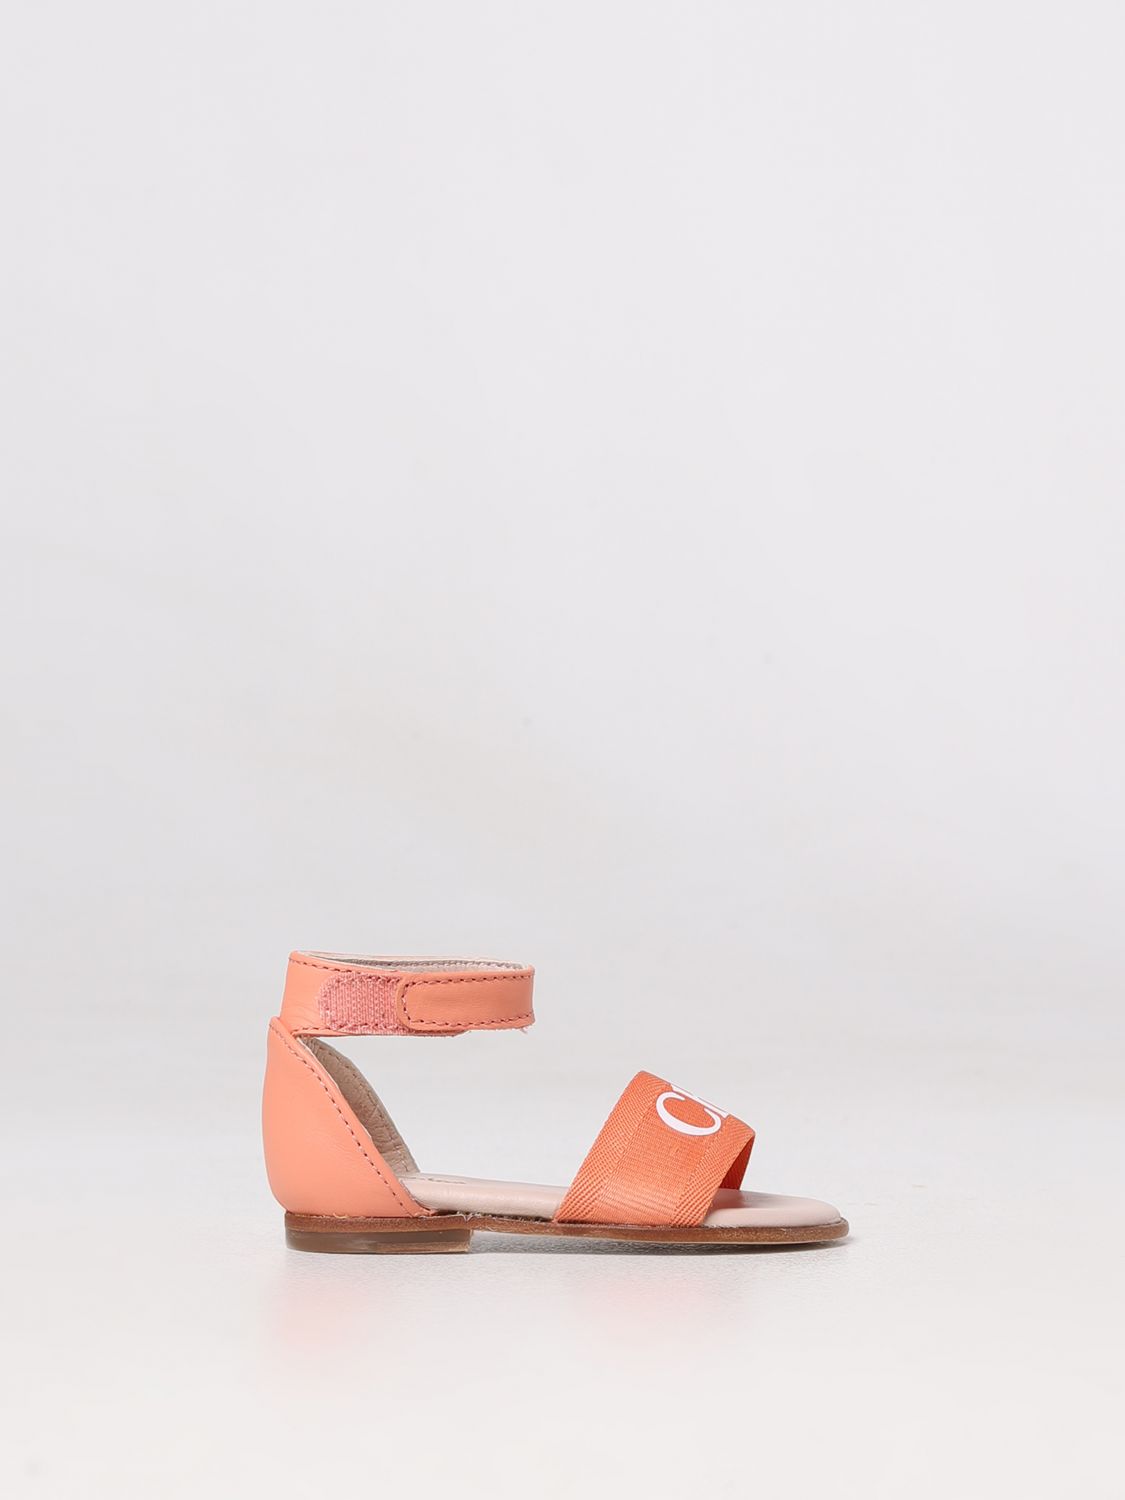 CHLOÉ SANDALS IN LEATHER,E07316056